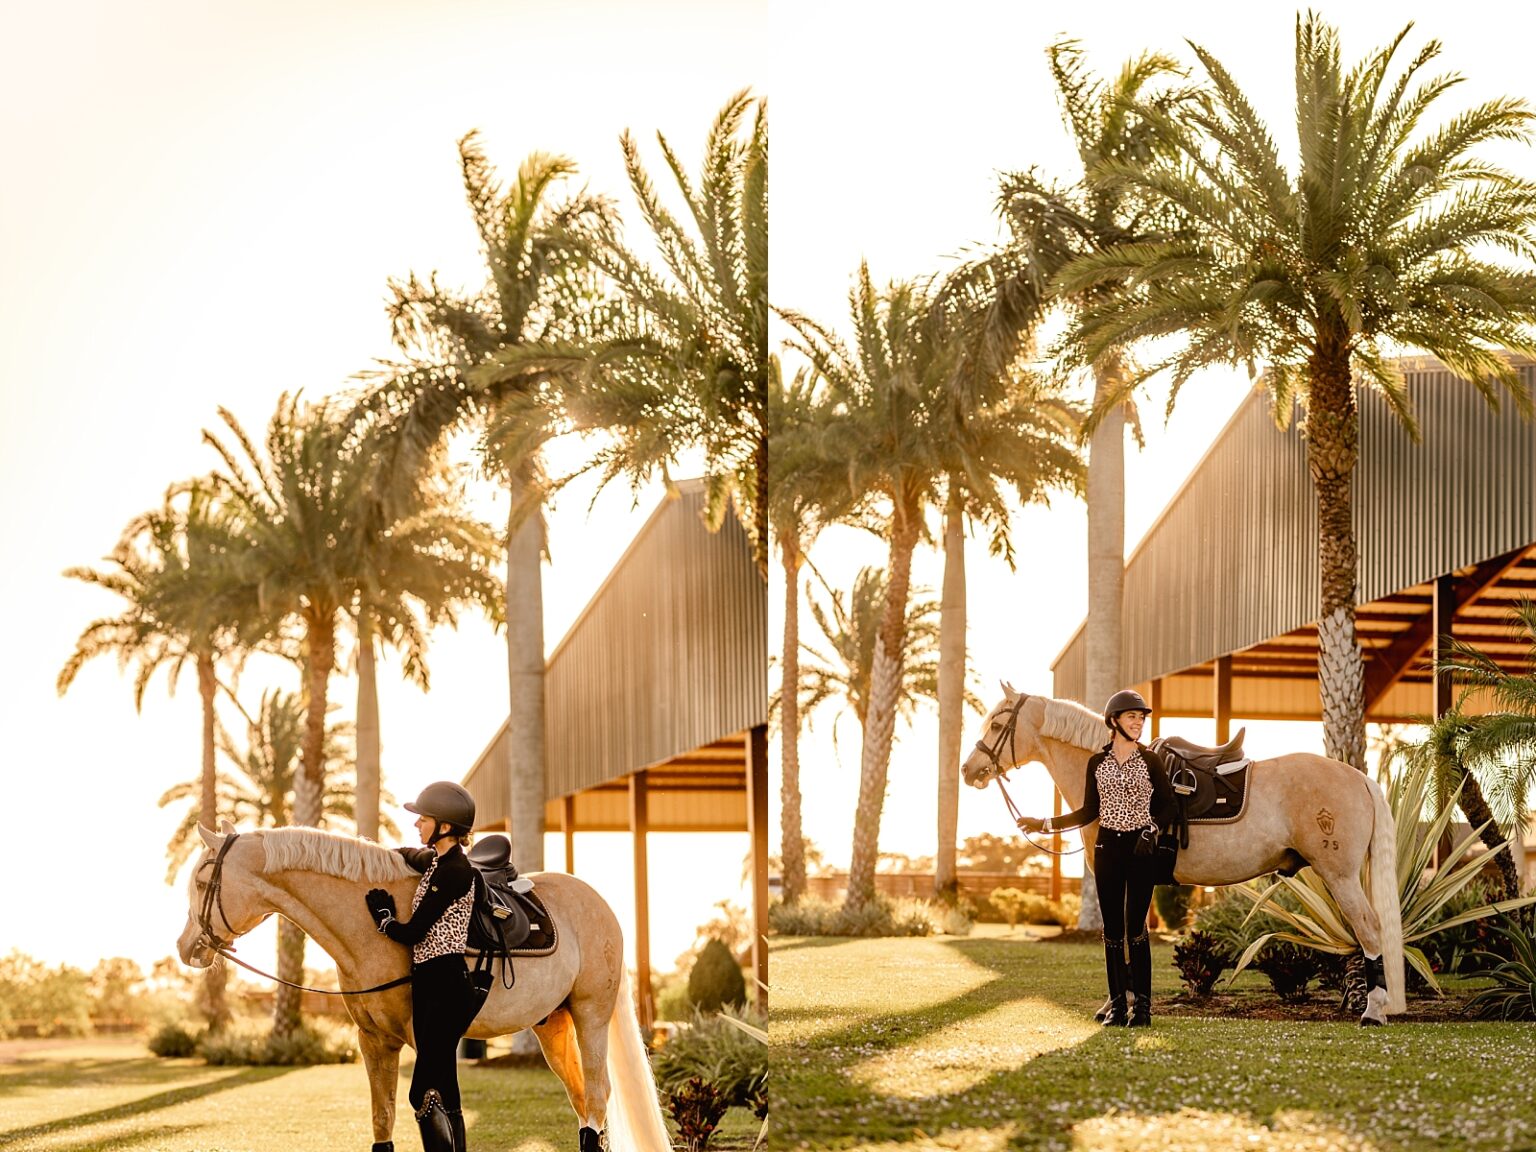 Horse and rider photoshoot during the warm Florida sunset in Wellington, Florida. Rider wearing cute cheetah print blouse modeling with her palomino German Riding Pony.